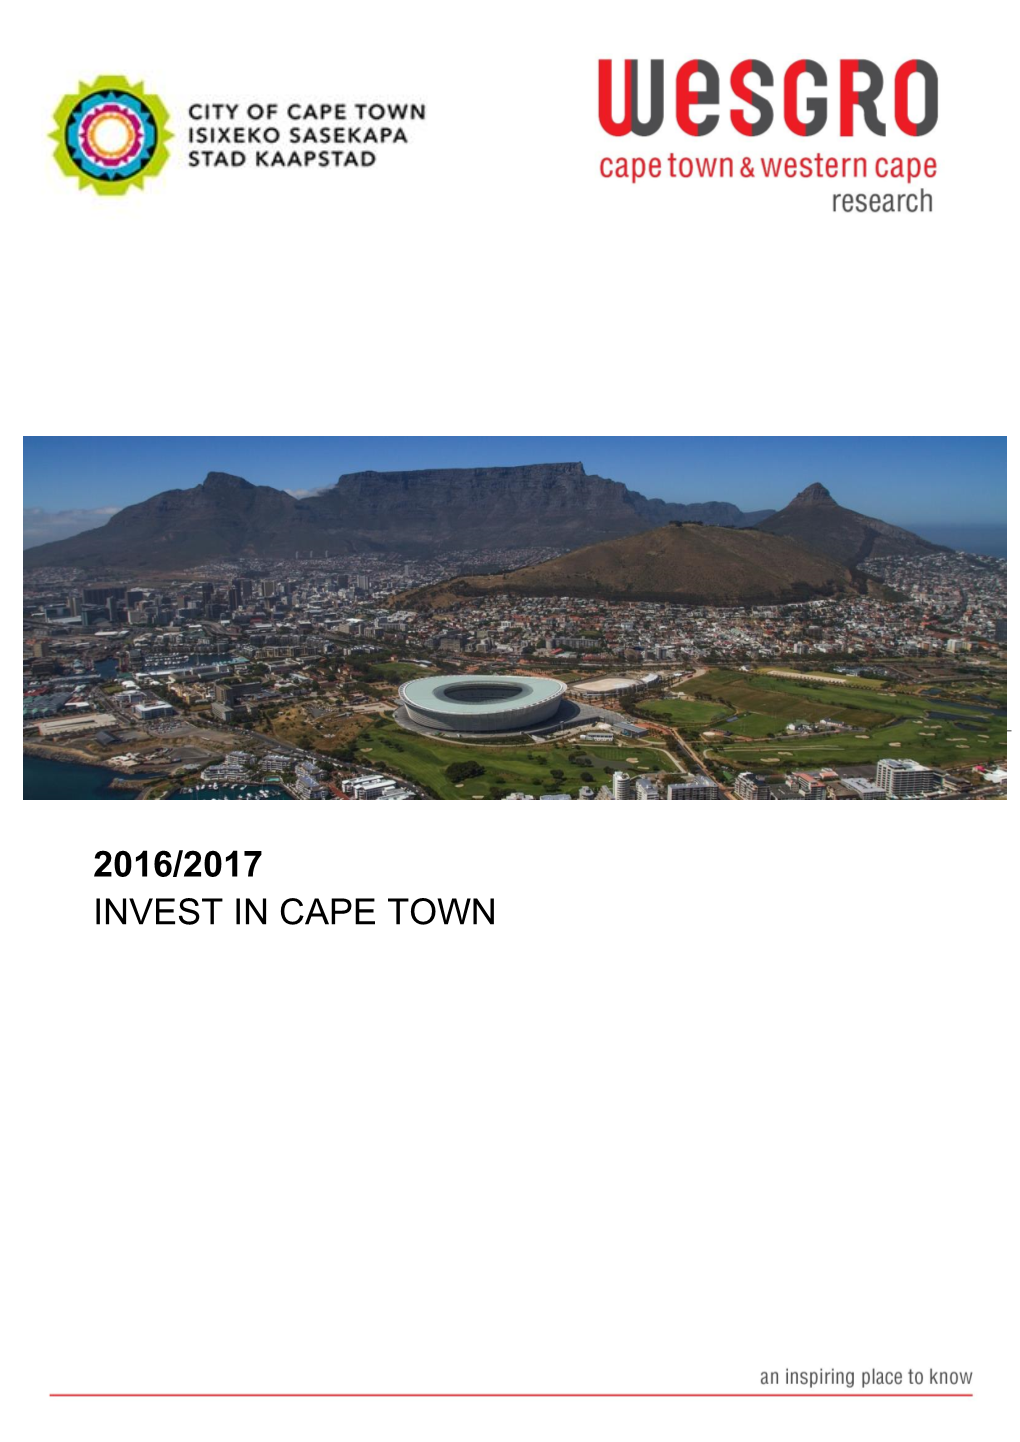 2016/2017 Invest in Cape Town